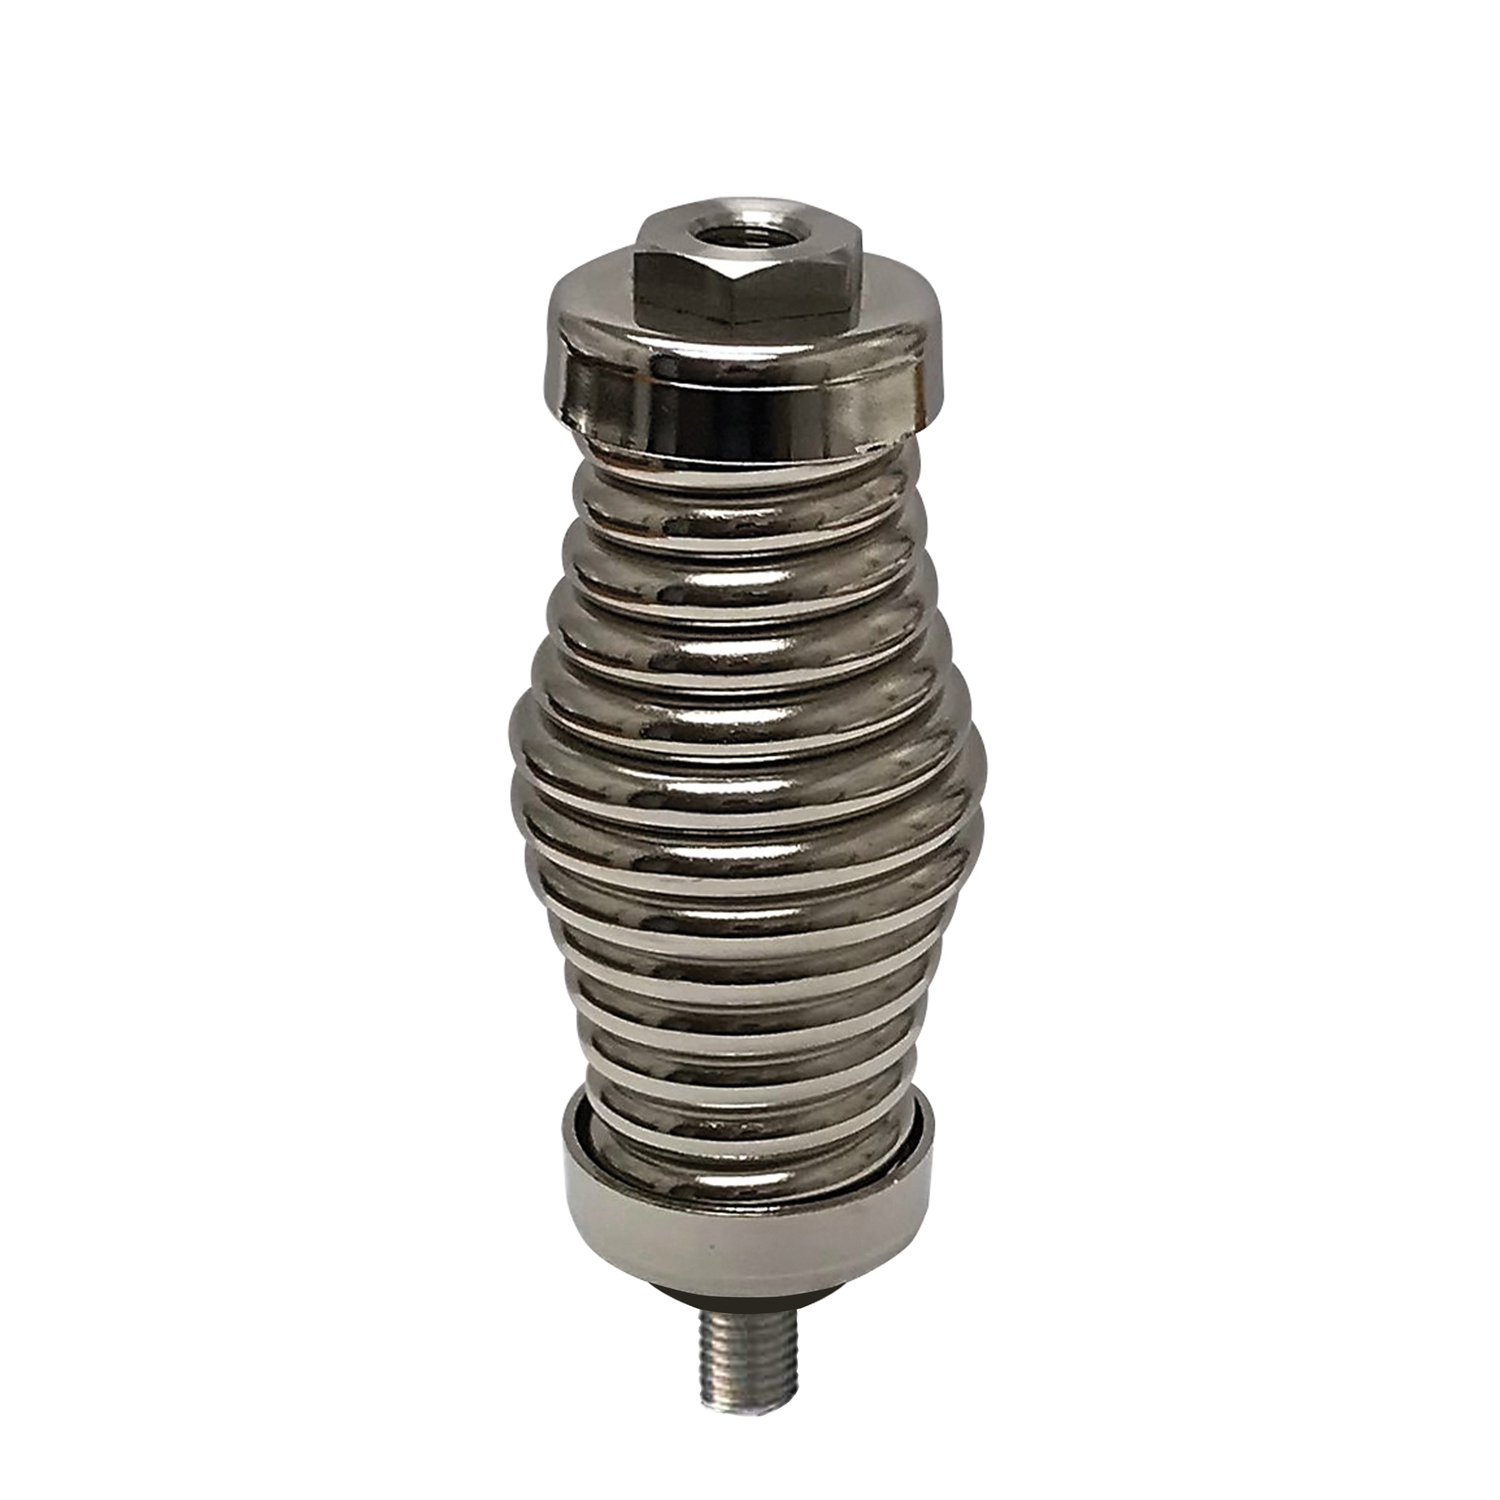 Accessories Unlimited - AU305SS Heavy Duty Stainless Steel Barrel  Spring With 3/8"X24" Standard Threads